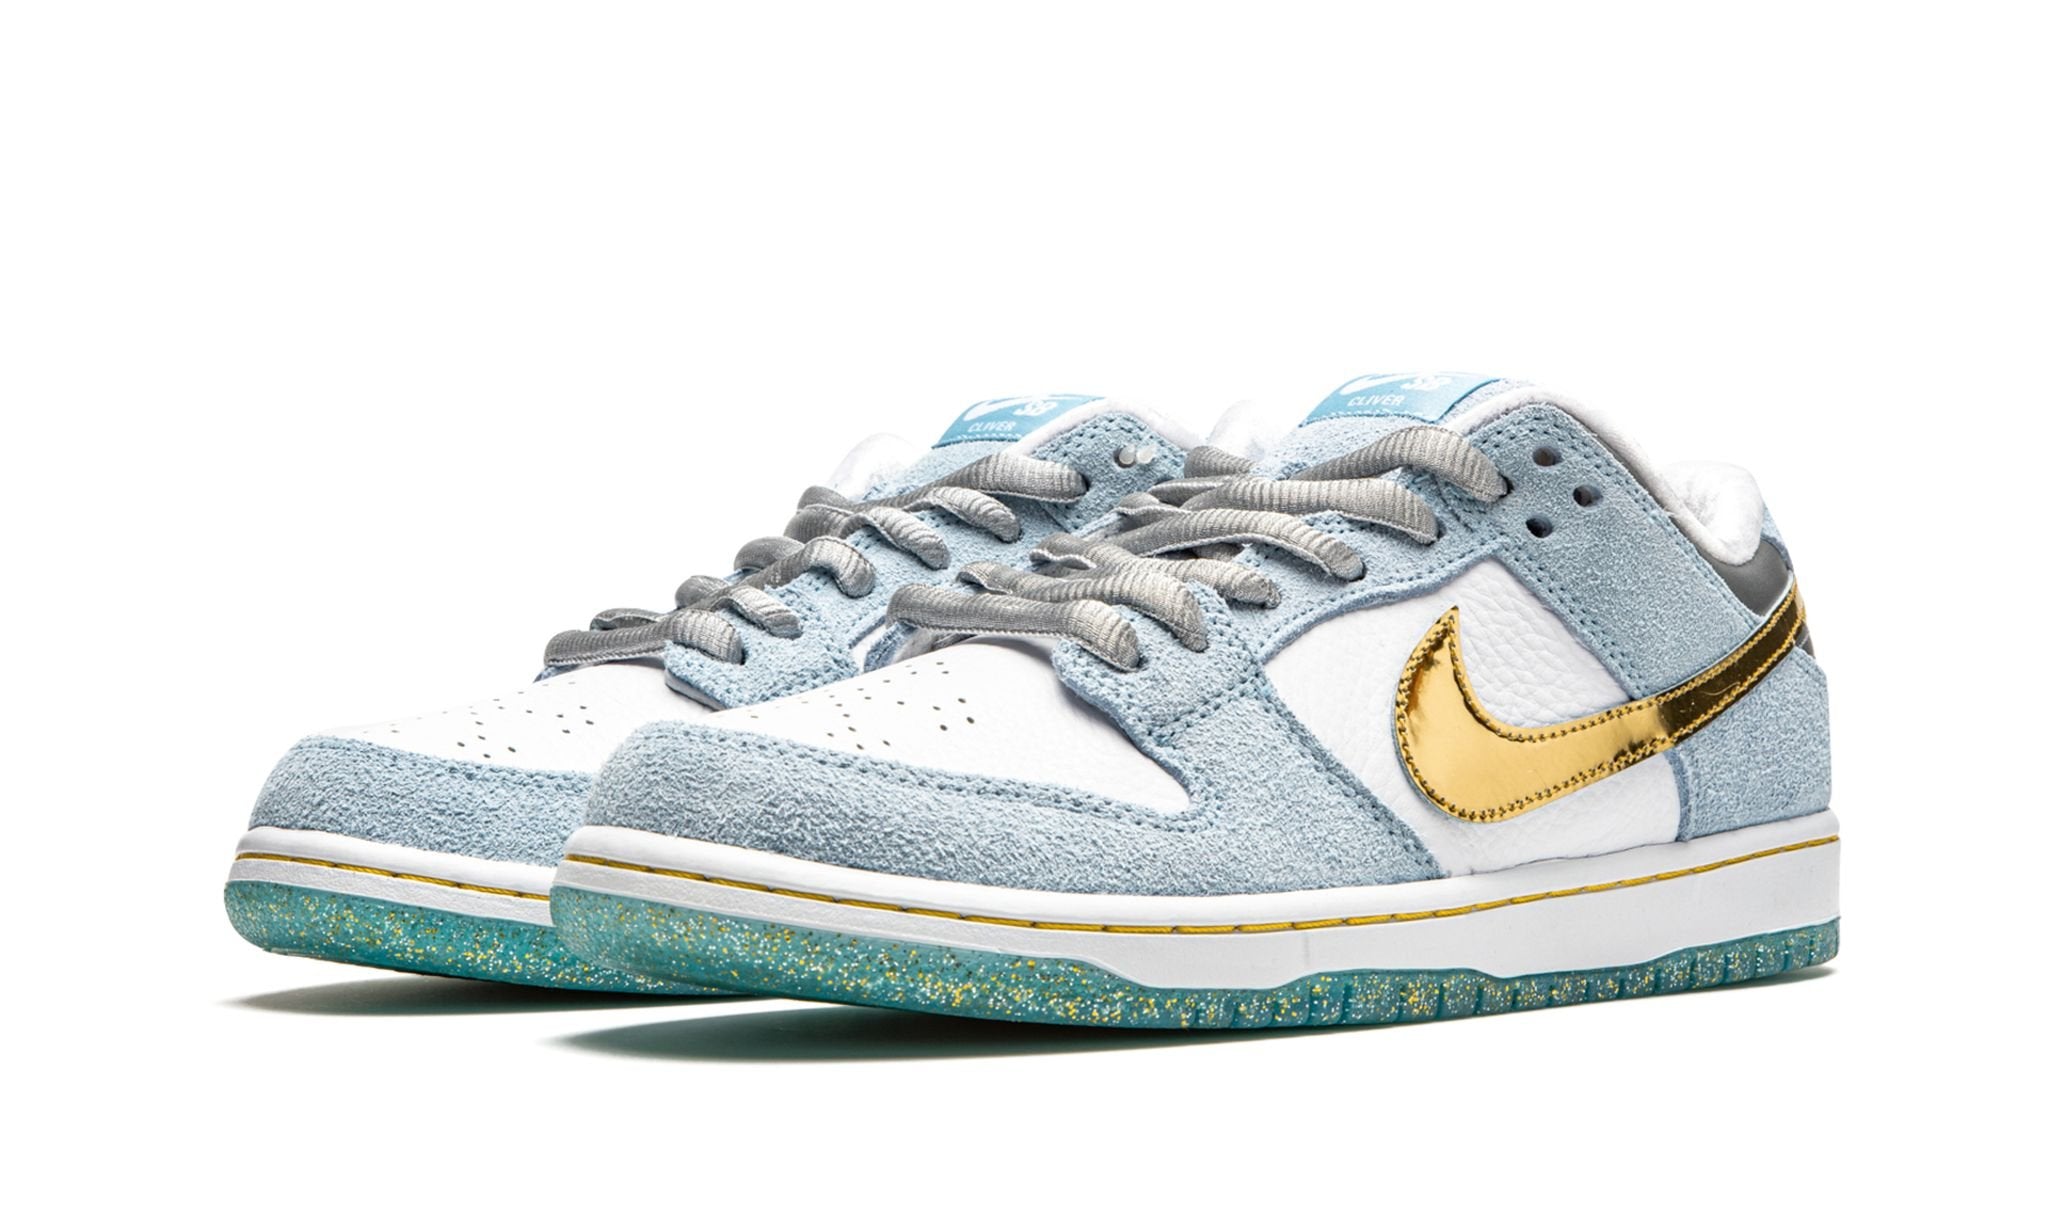 SB Dunk Low Sean Cliver Holiday Special